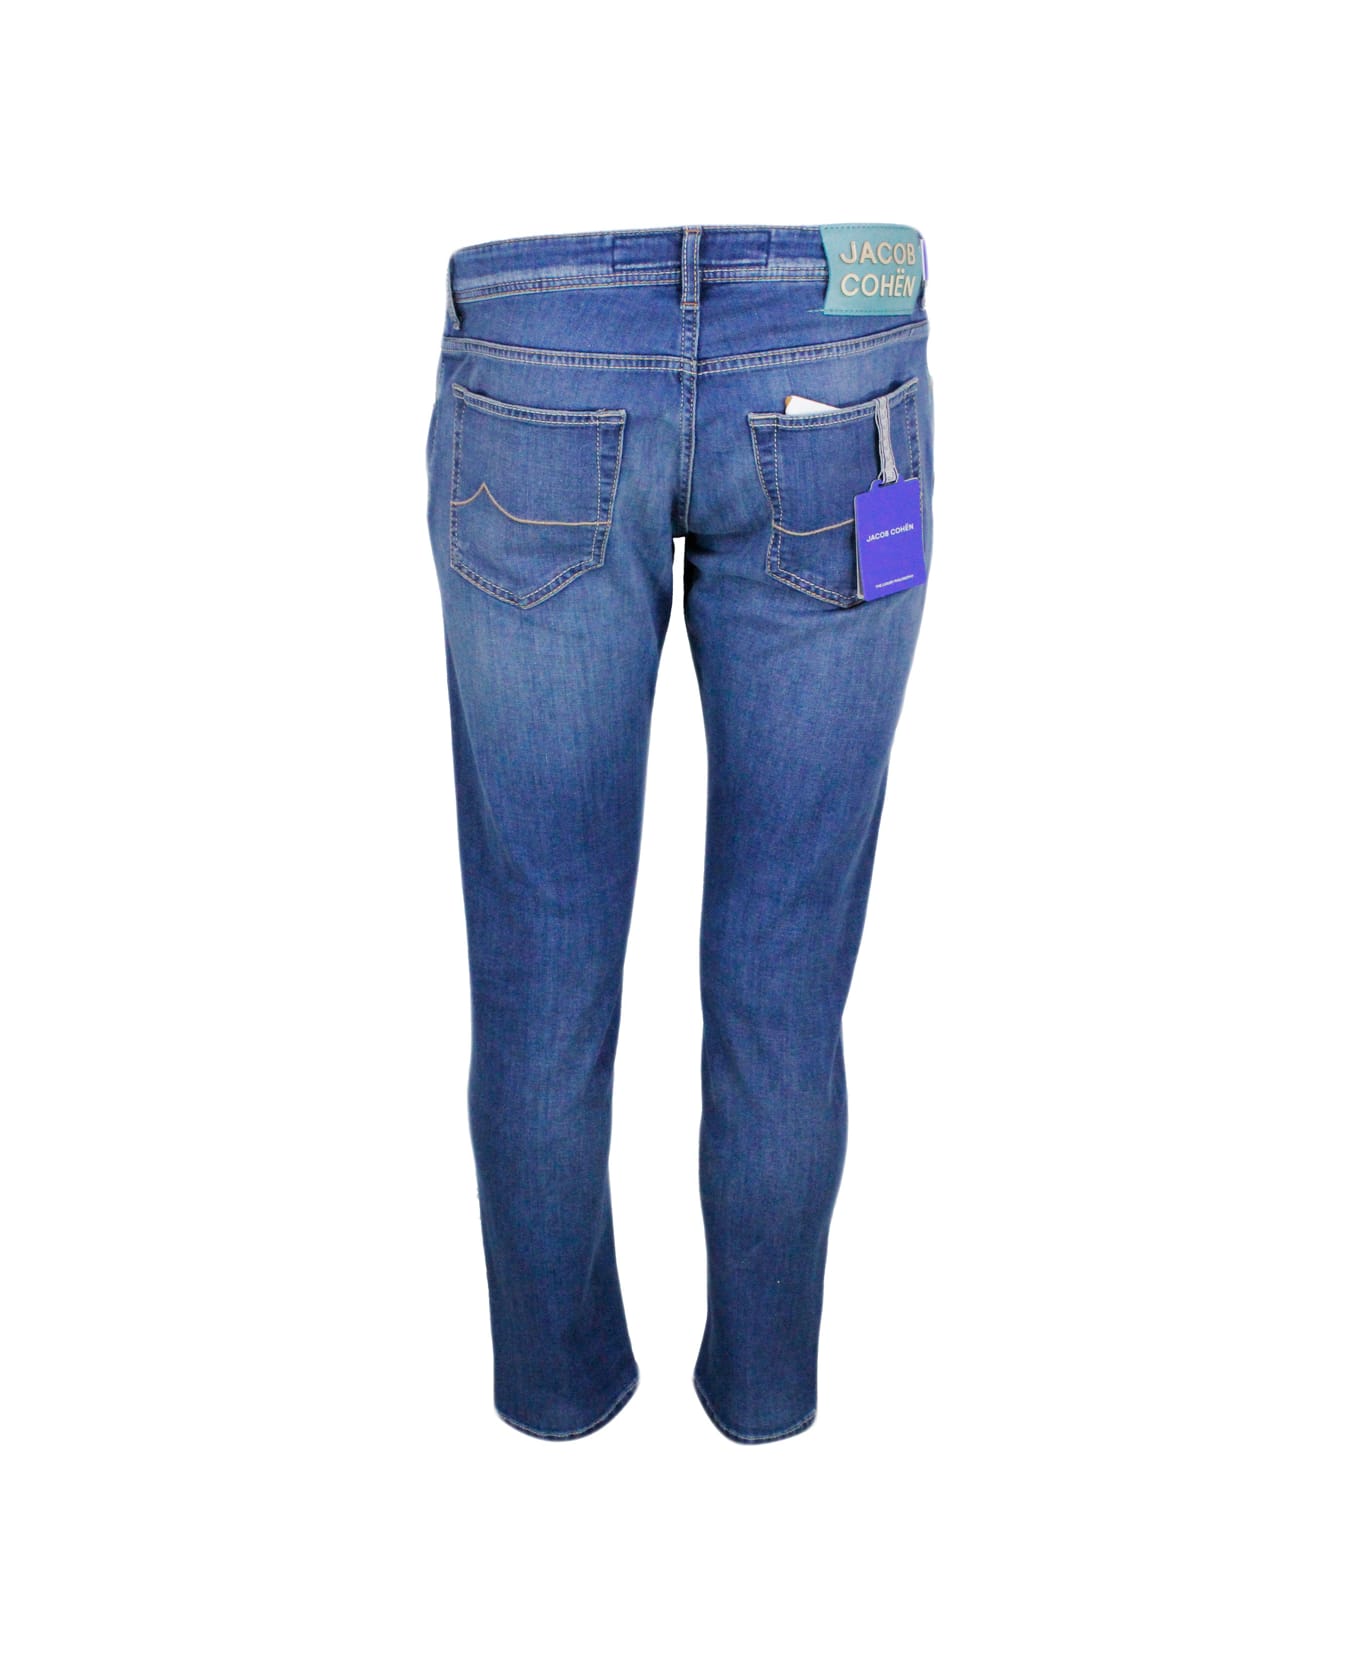 Jacob Cohen Nick Slim J622 Trousers In Luxury Edition Denim In Soft Stretch Denim With Fake Tears, 5 Pockets With Button Closure And Button, Pony Skin Bow - Denim